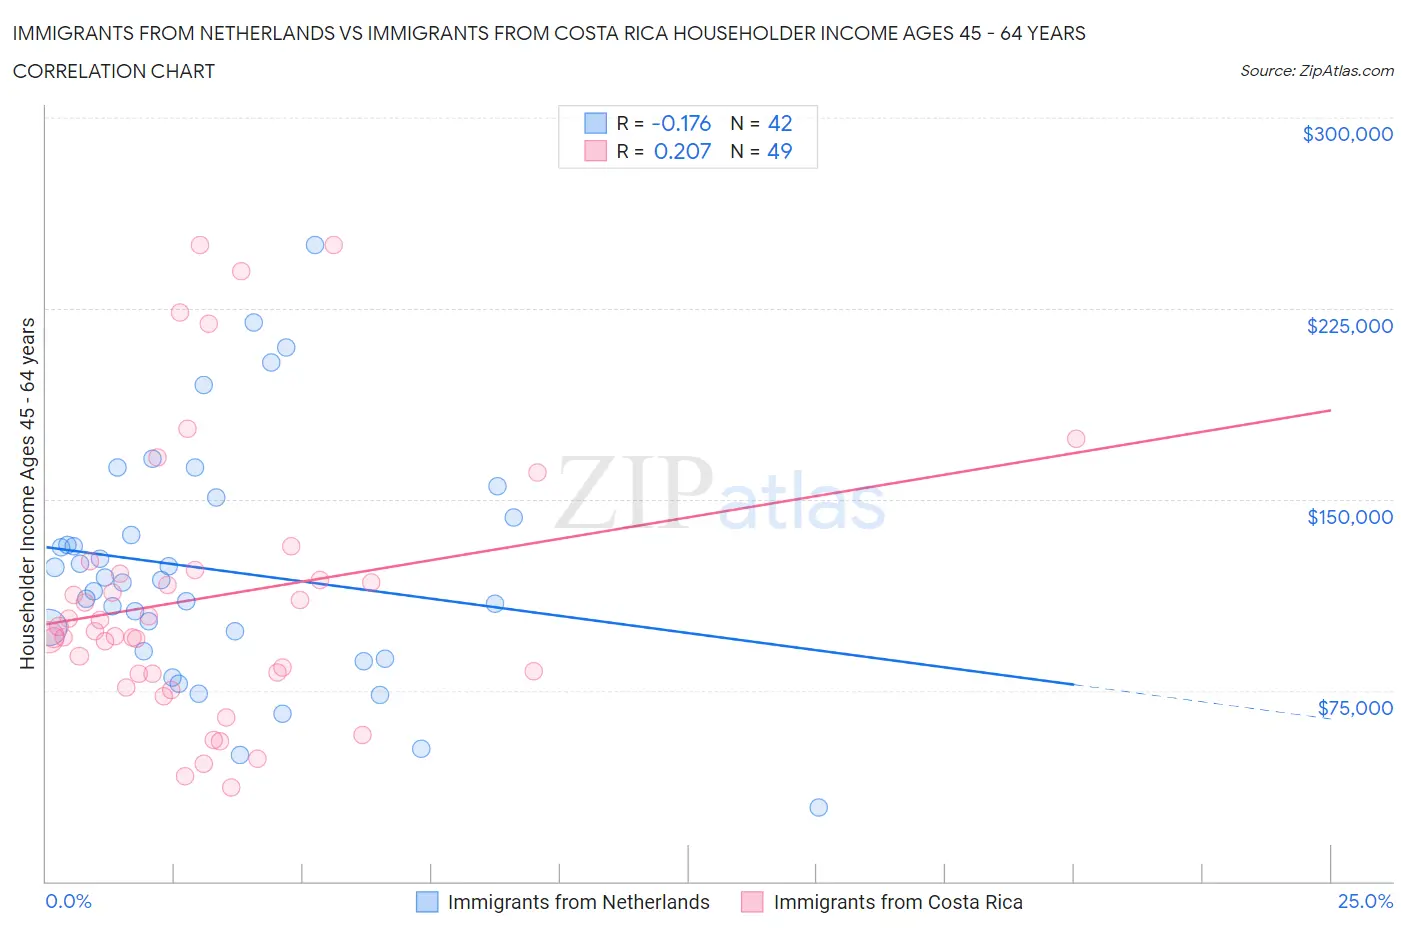 Immigrants from Netherlands vs Immigrants from Costa Rica Householder Income Ages 45 - 64 years